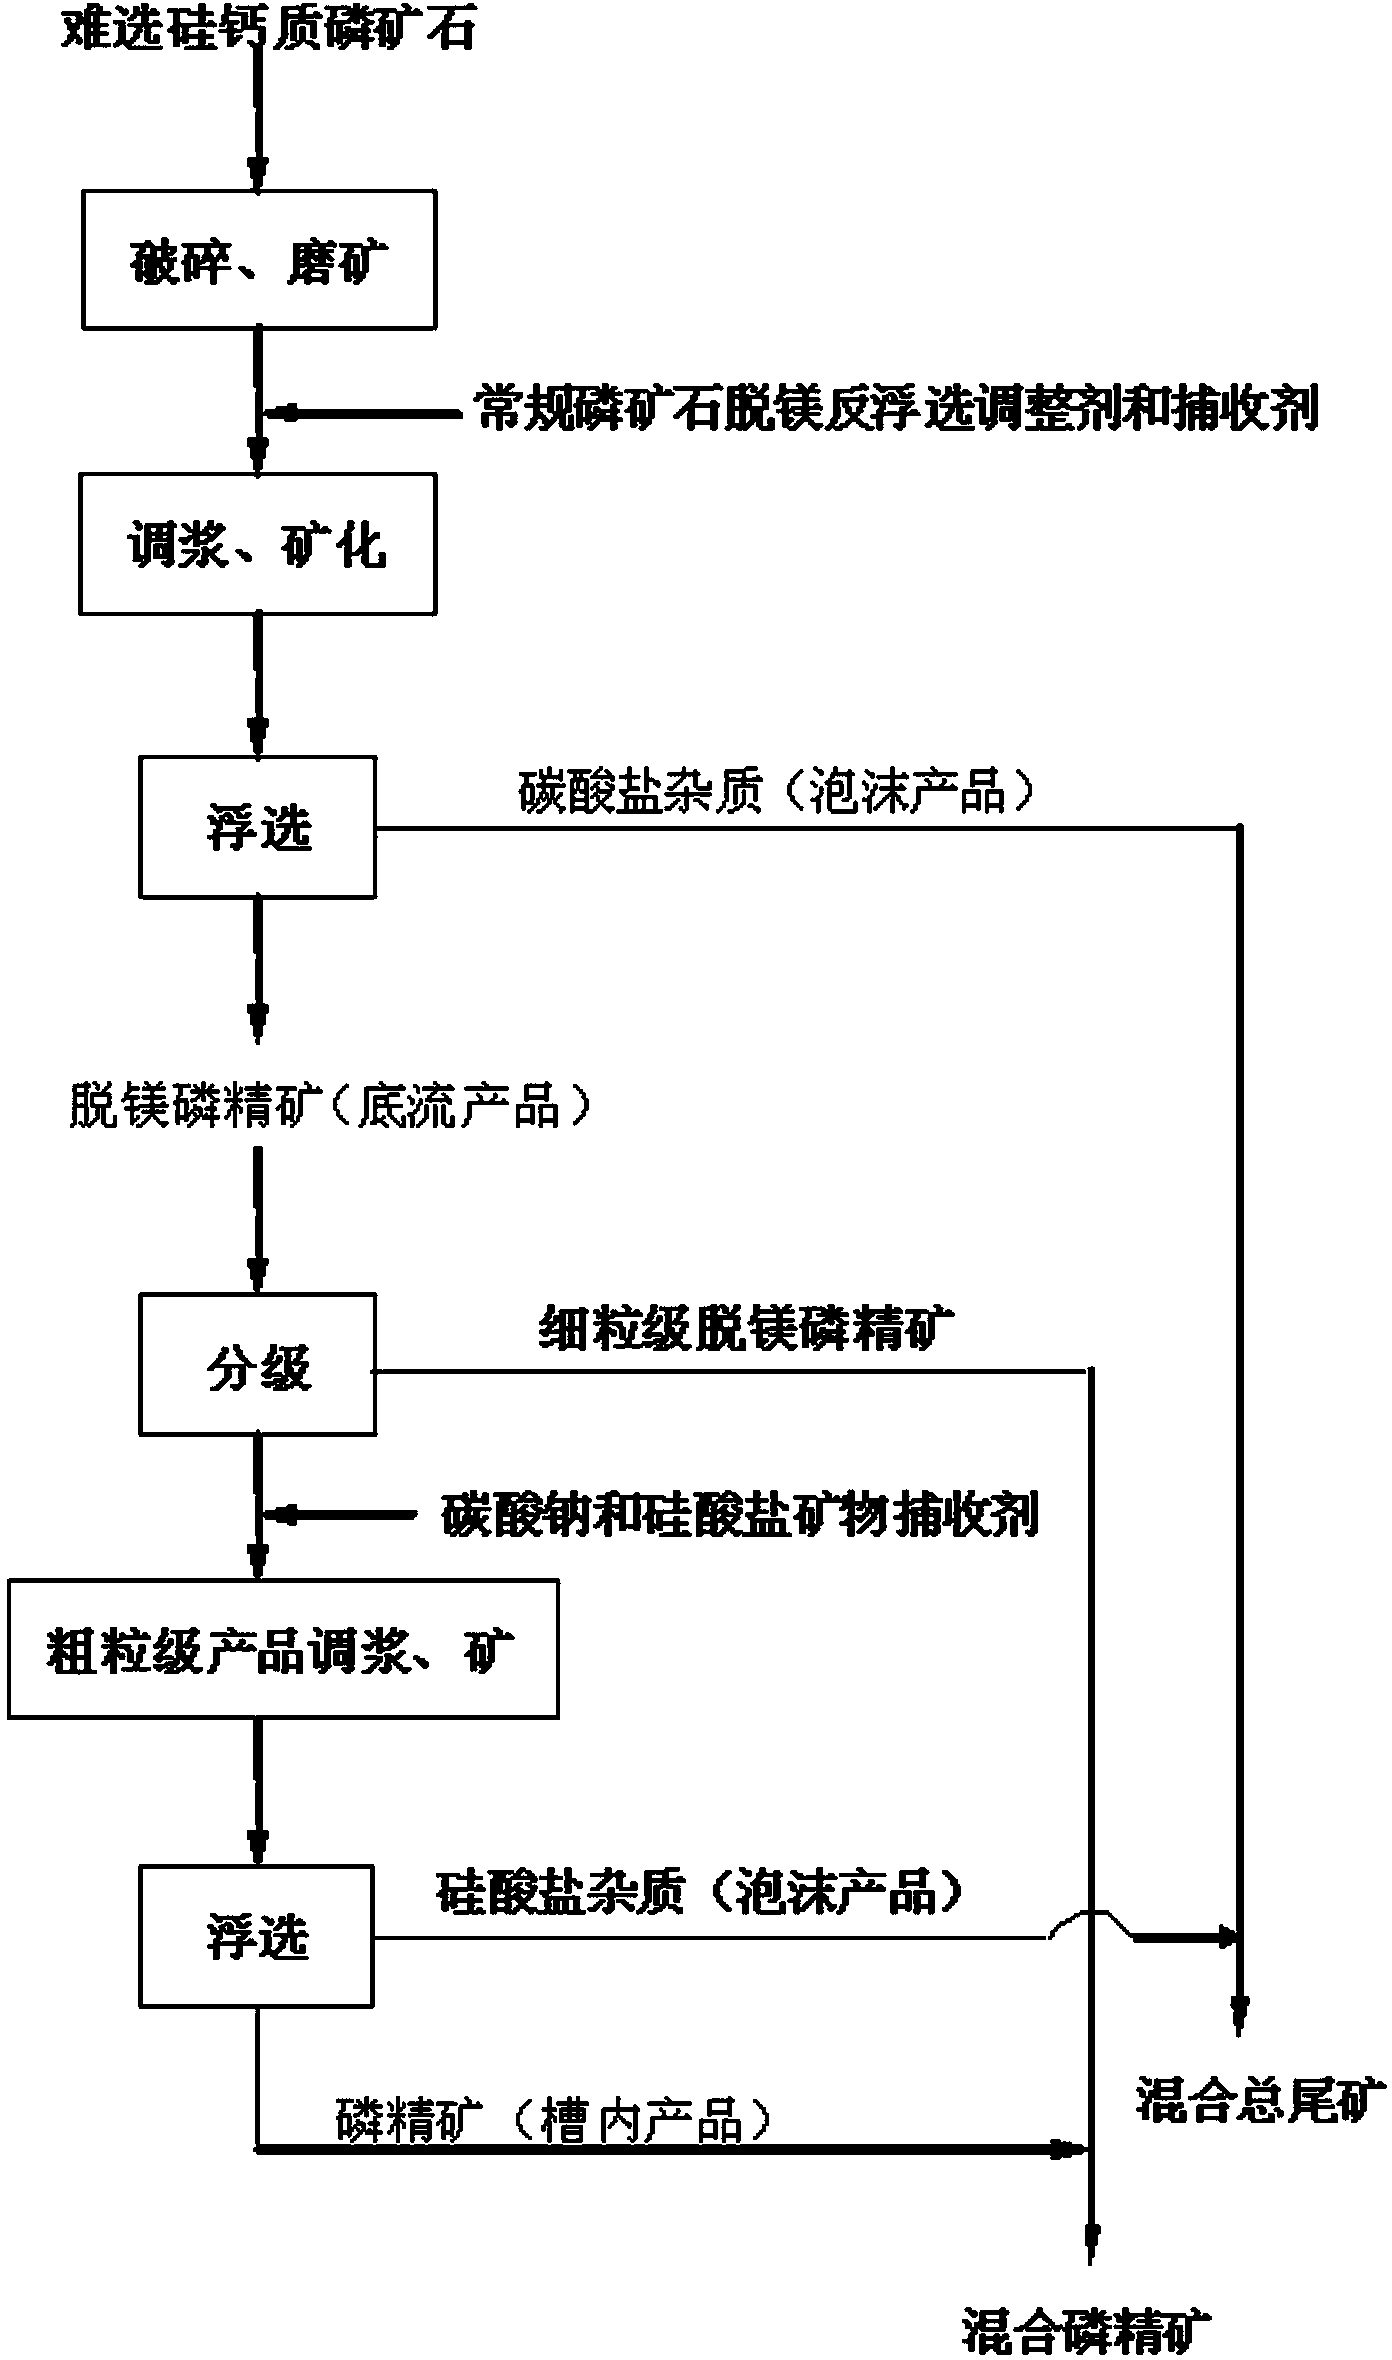 Floatation method for silica-calcium collophane with difficult separation